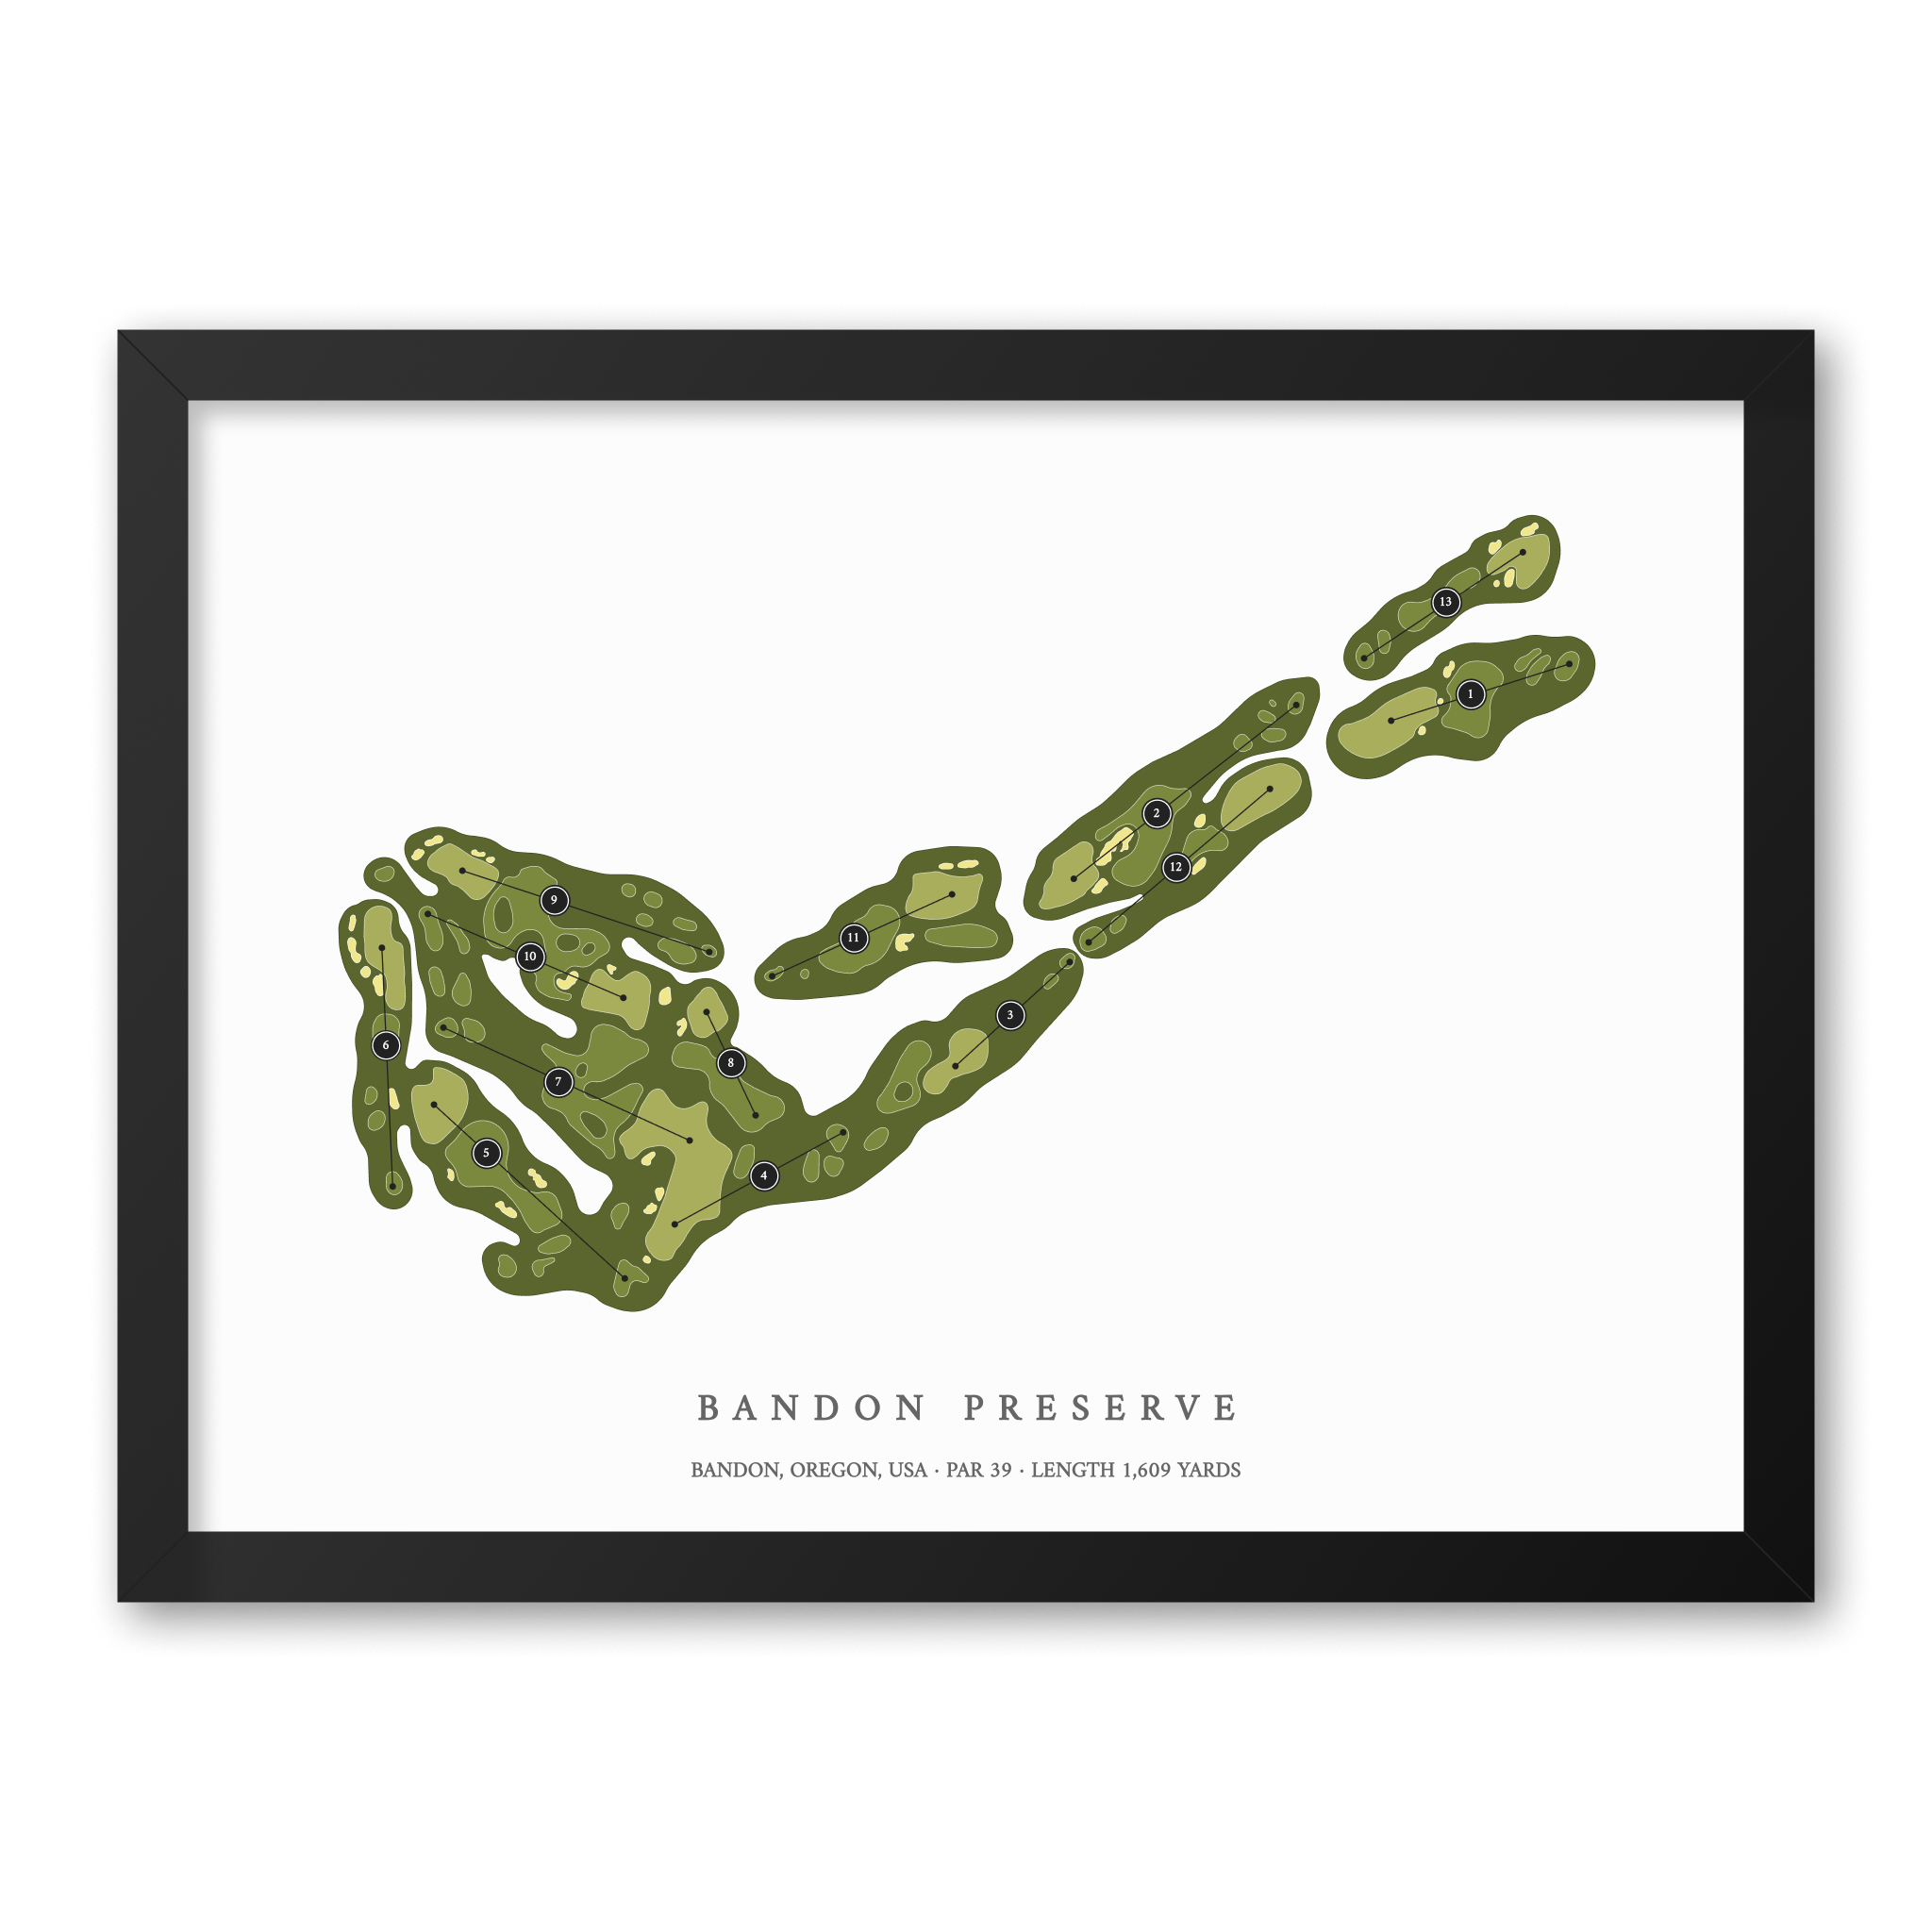 Bandon Preserve| Golf Course Print | Black Frame With Hole Numbers #hole numbers_yes